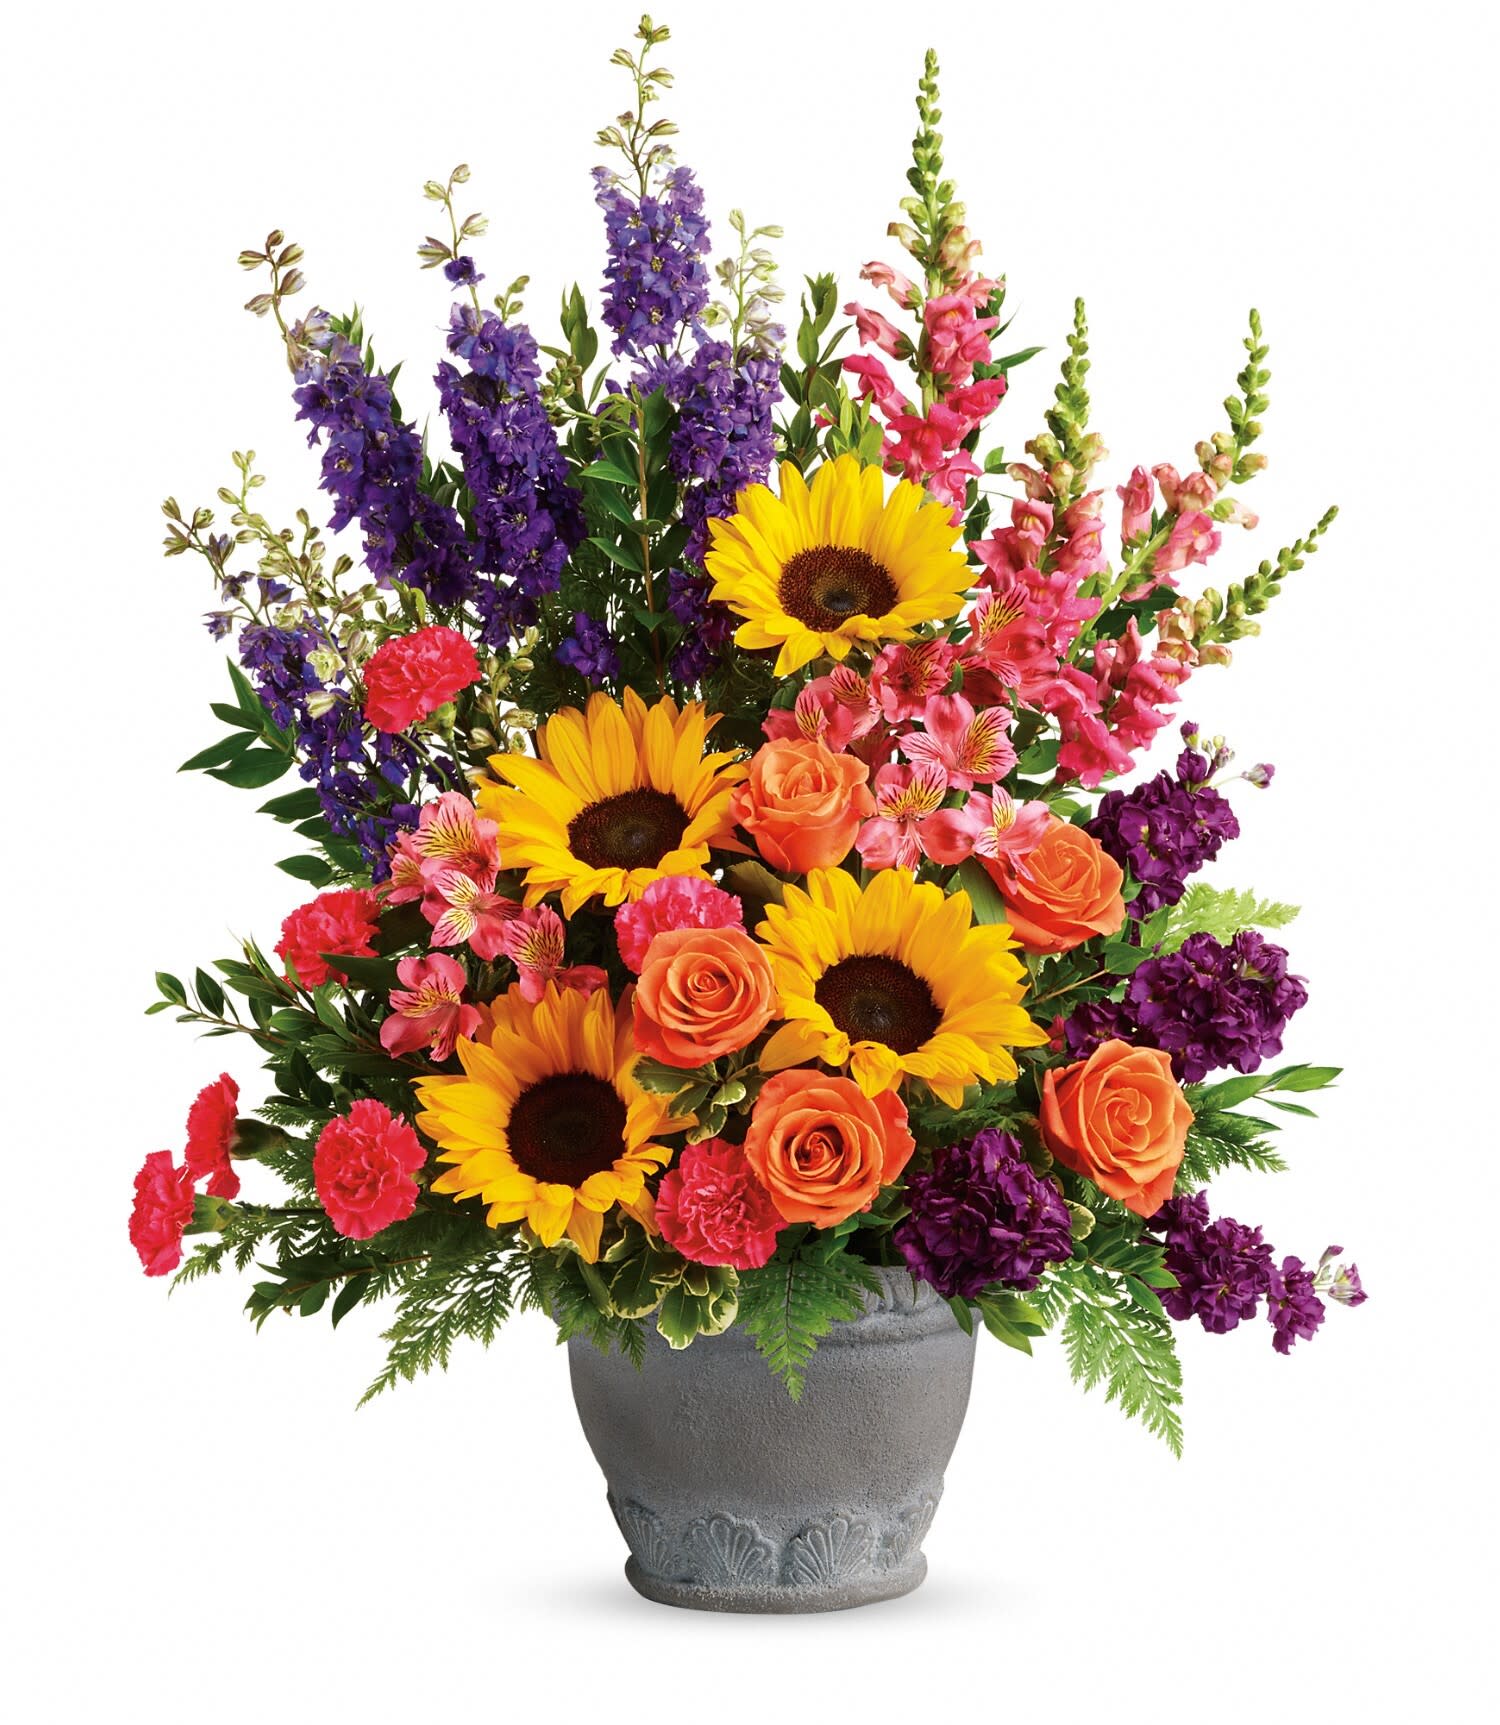 Hues Of Hope Bouquet - T279-1B: A colorful reminder that brighter days are ahead, this uplifting arrangement of sunflowers and roses in an elegant large antiqued pot brings joy and hope.  This bright arrangement includes orange roses, pink alstroemeria, hot pink carnations, yellow sunflowers, purple larkspur, purple stock, hot pink snapdragons, myrtle, variegated pittosporum, and leatherleaf fern. Delivered in a Parisian Garden Pot.   Approximately 23&quot; W x 30&quot; H Orientation: One-Sided As Shown: T279-1B